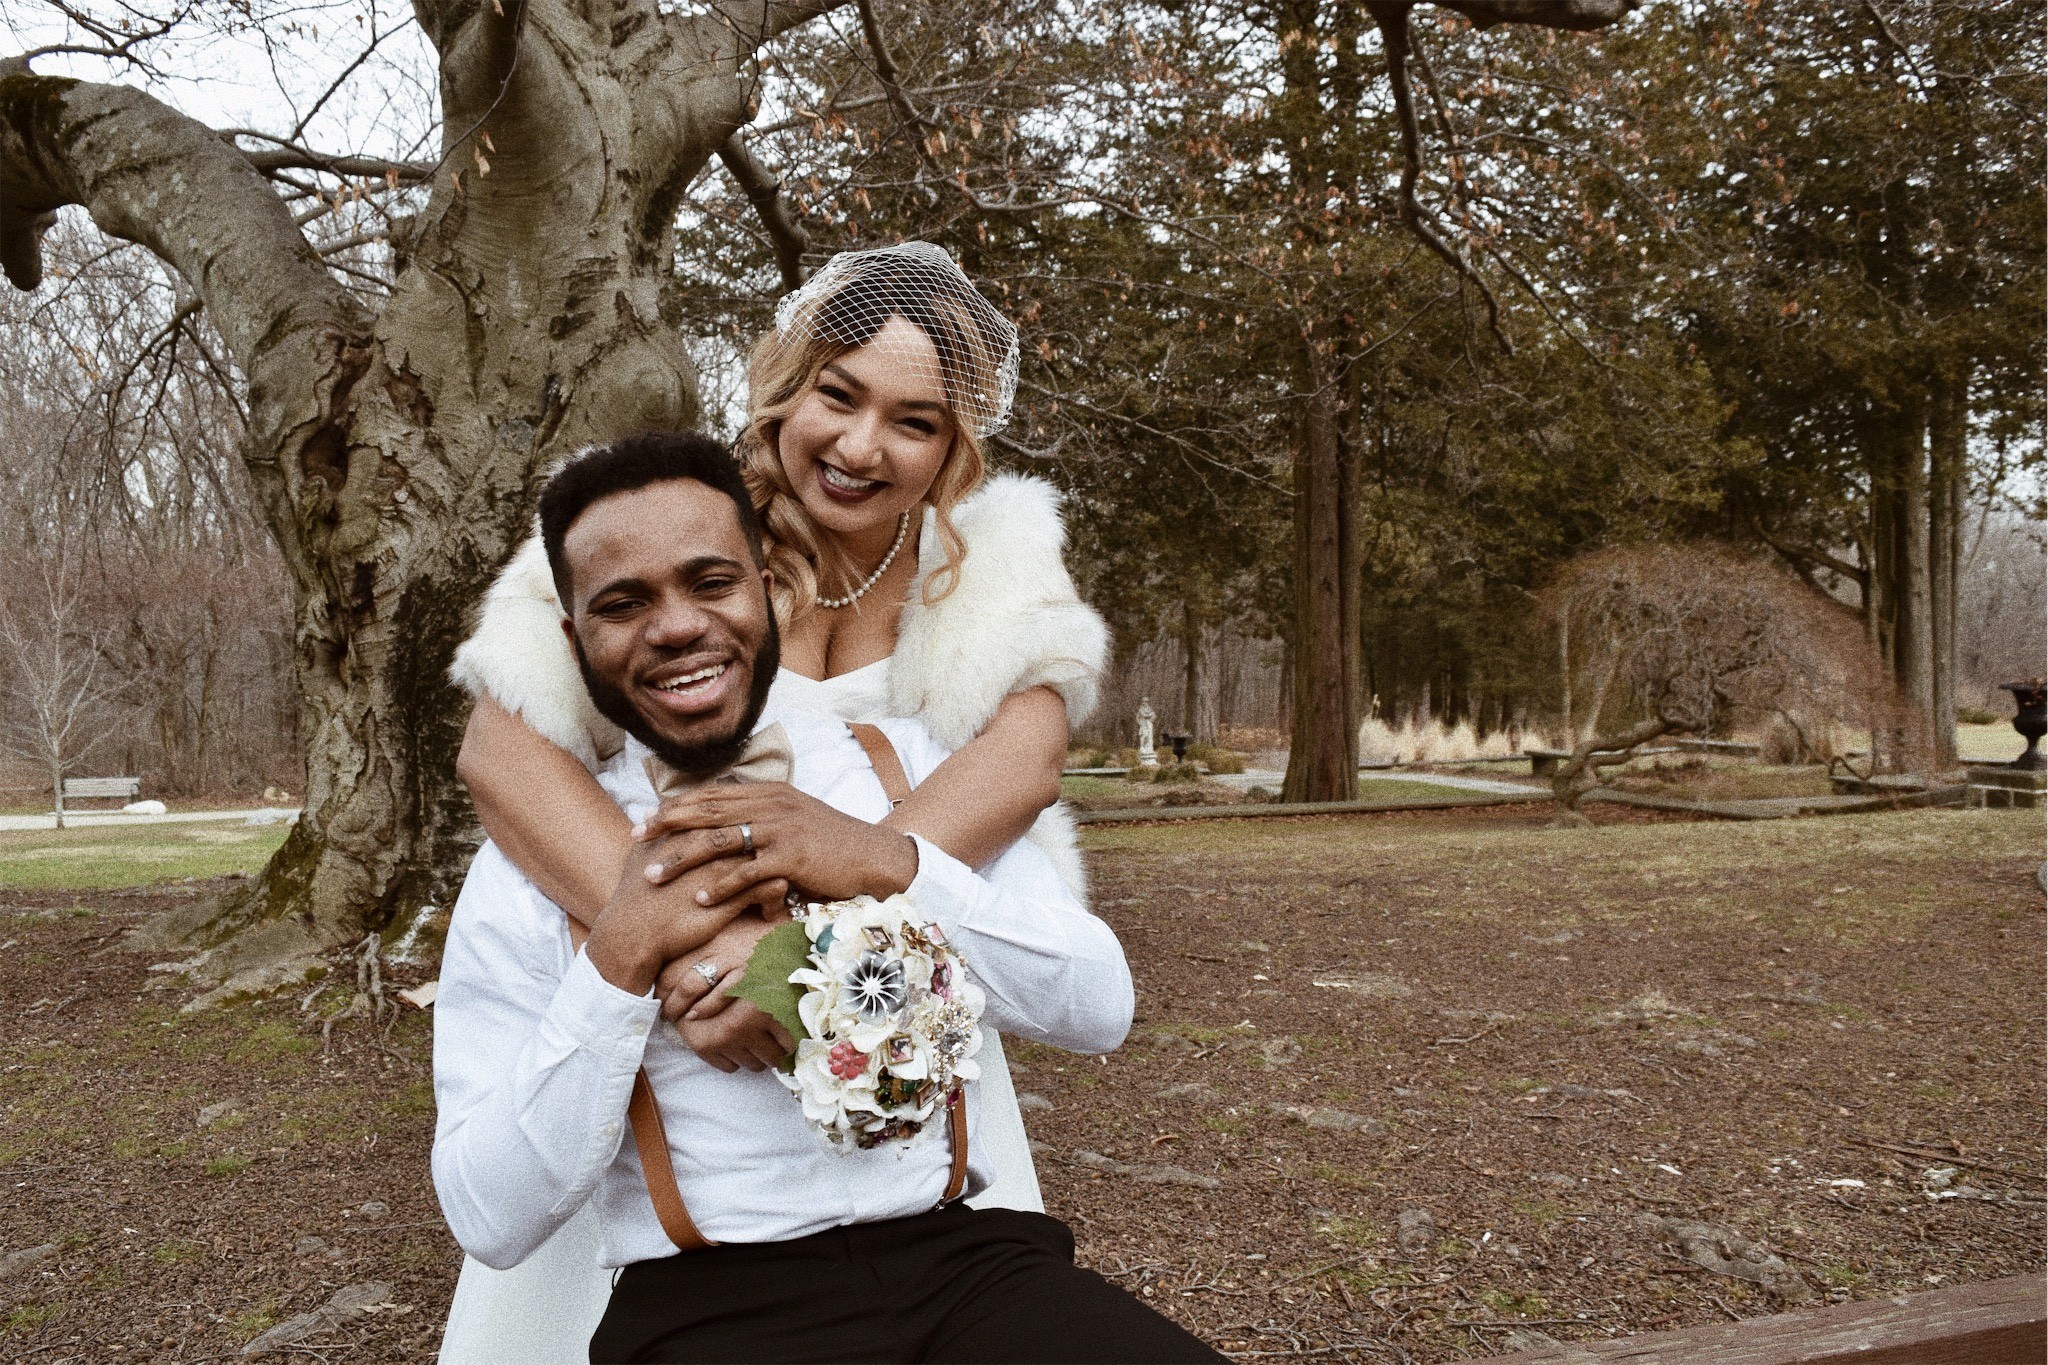  Photos Nigerian singer, Lamboginny and his woman Taccara Rae tie the knot in vintage fashion